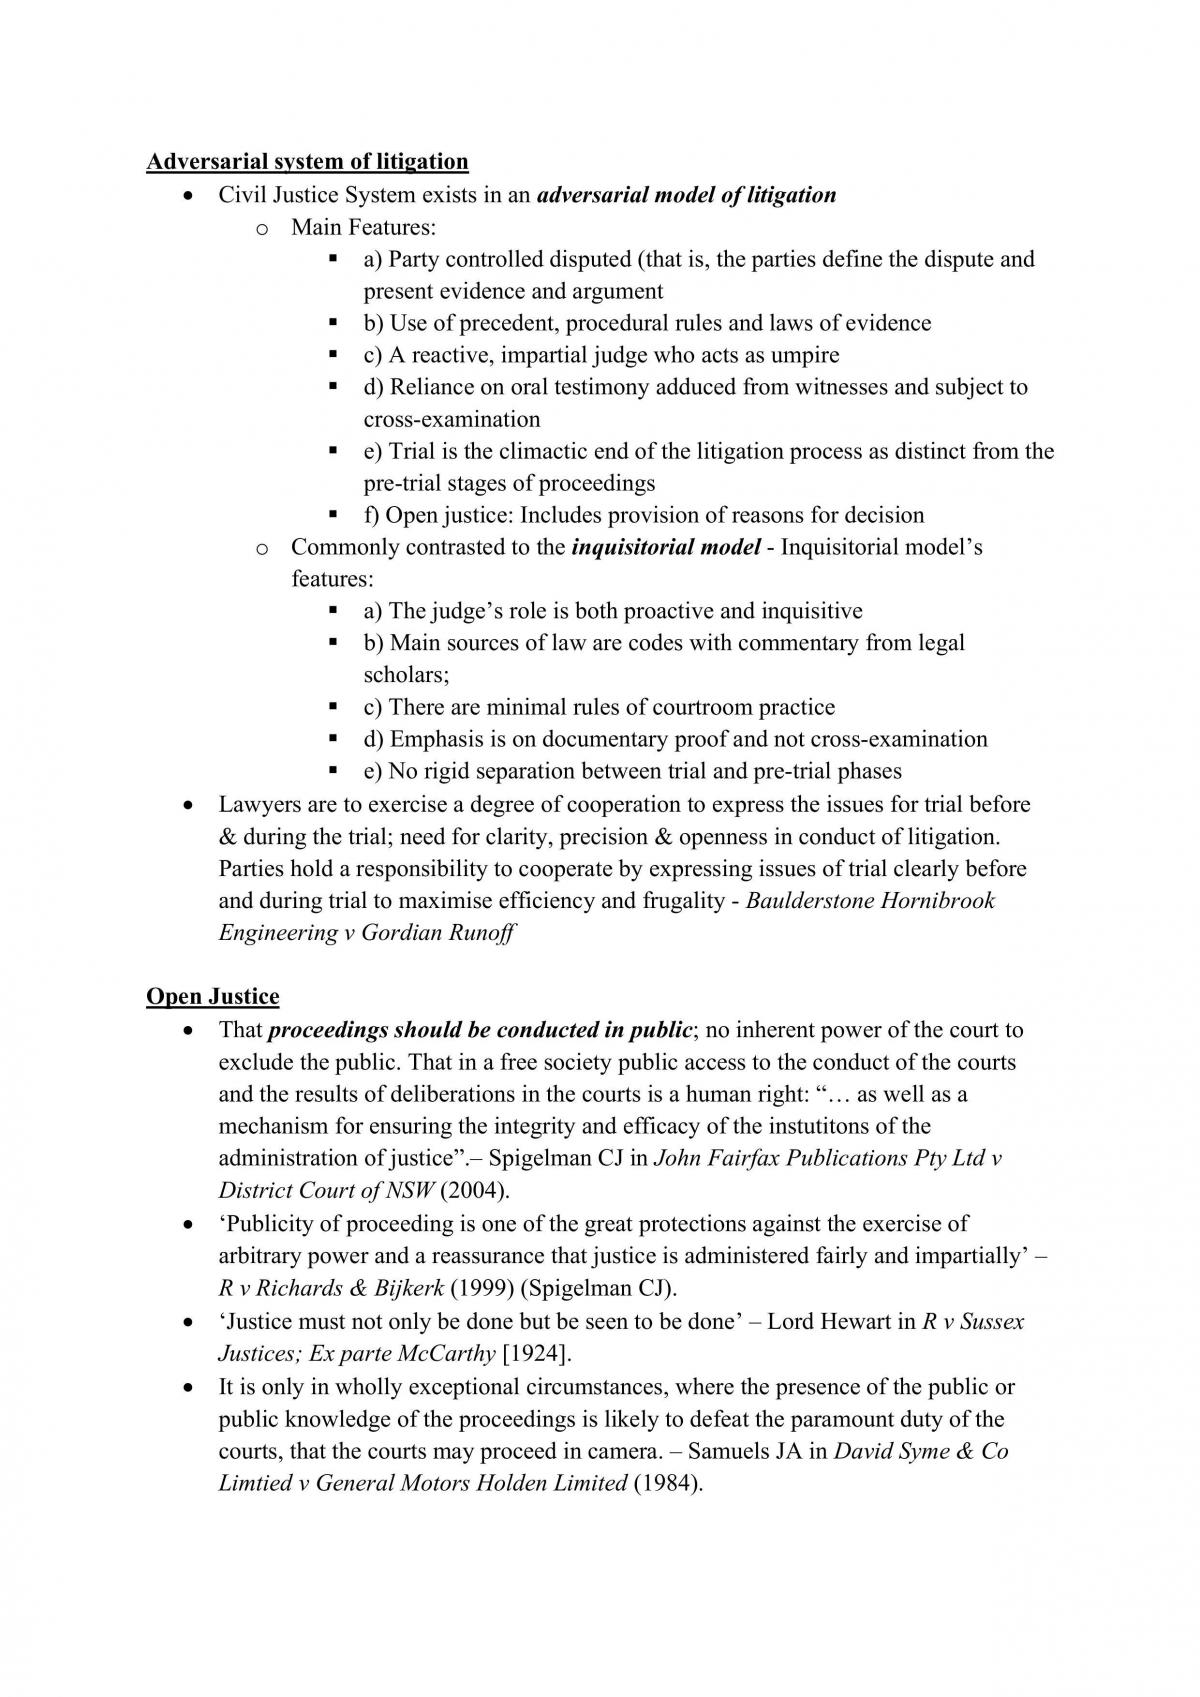 LAWS1014 Study Notes - Page 3